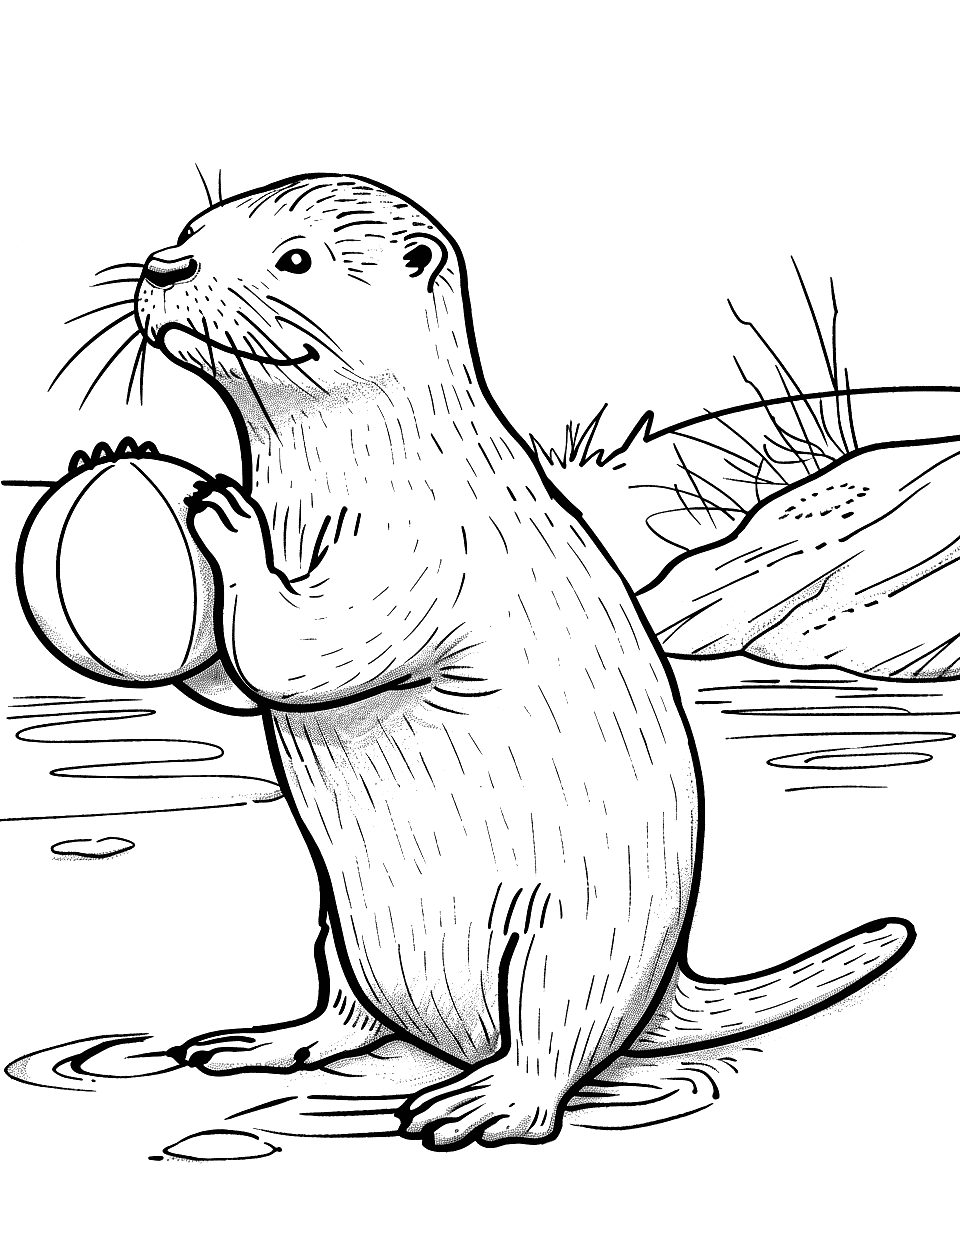 Otter Playing with a Ball Coloring Page - An otter on the shore, playing with a beach ball.